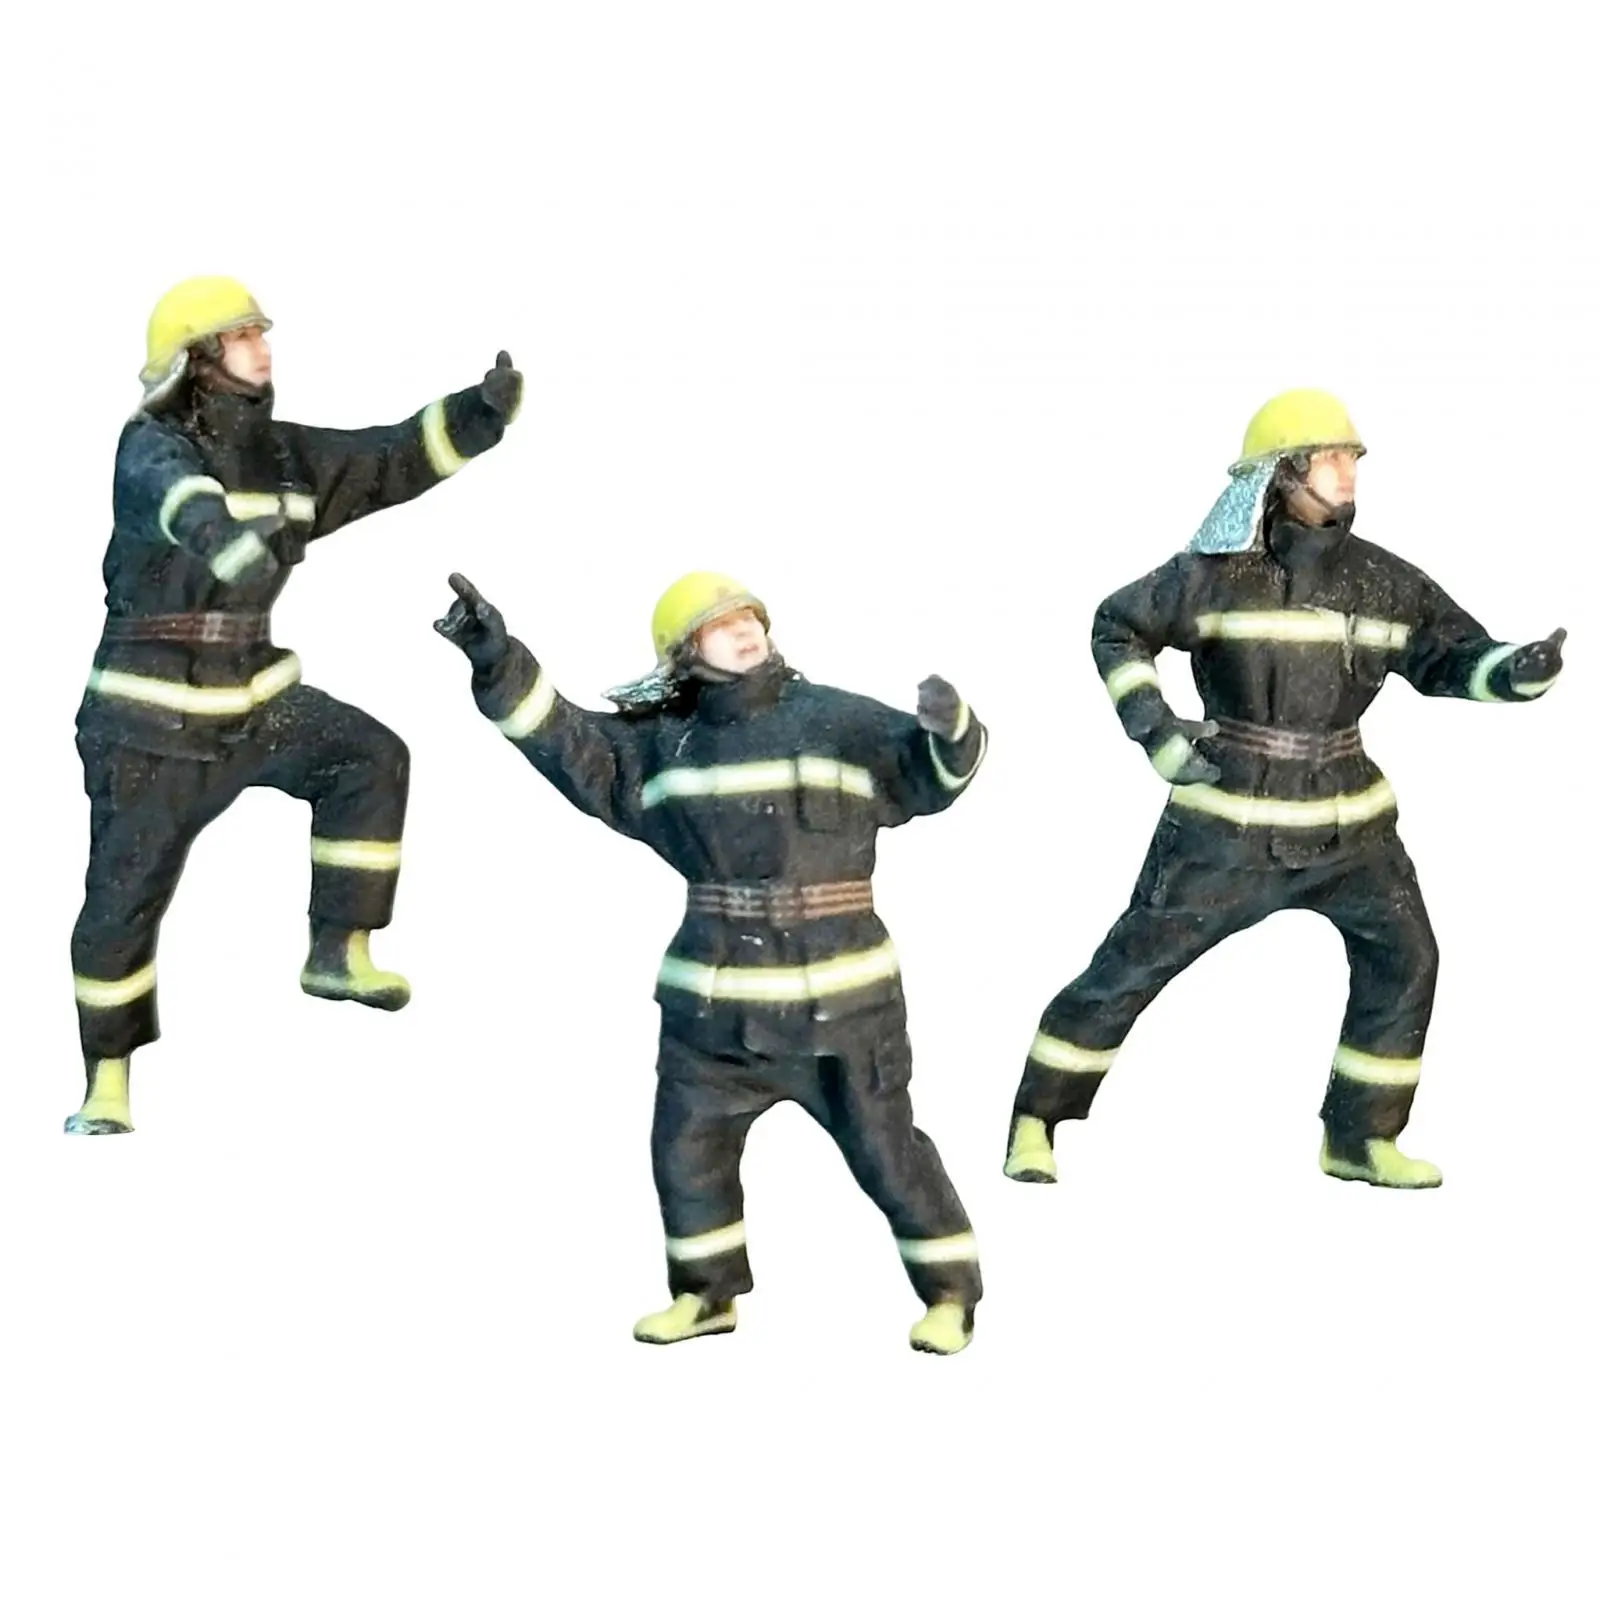 3x Miniature Firefighter Figures Hand Painted Collectibles Pretend Play Sand Table Ornament for DIY Scene Dollhouse Layout Decor